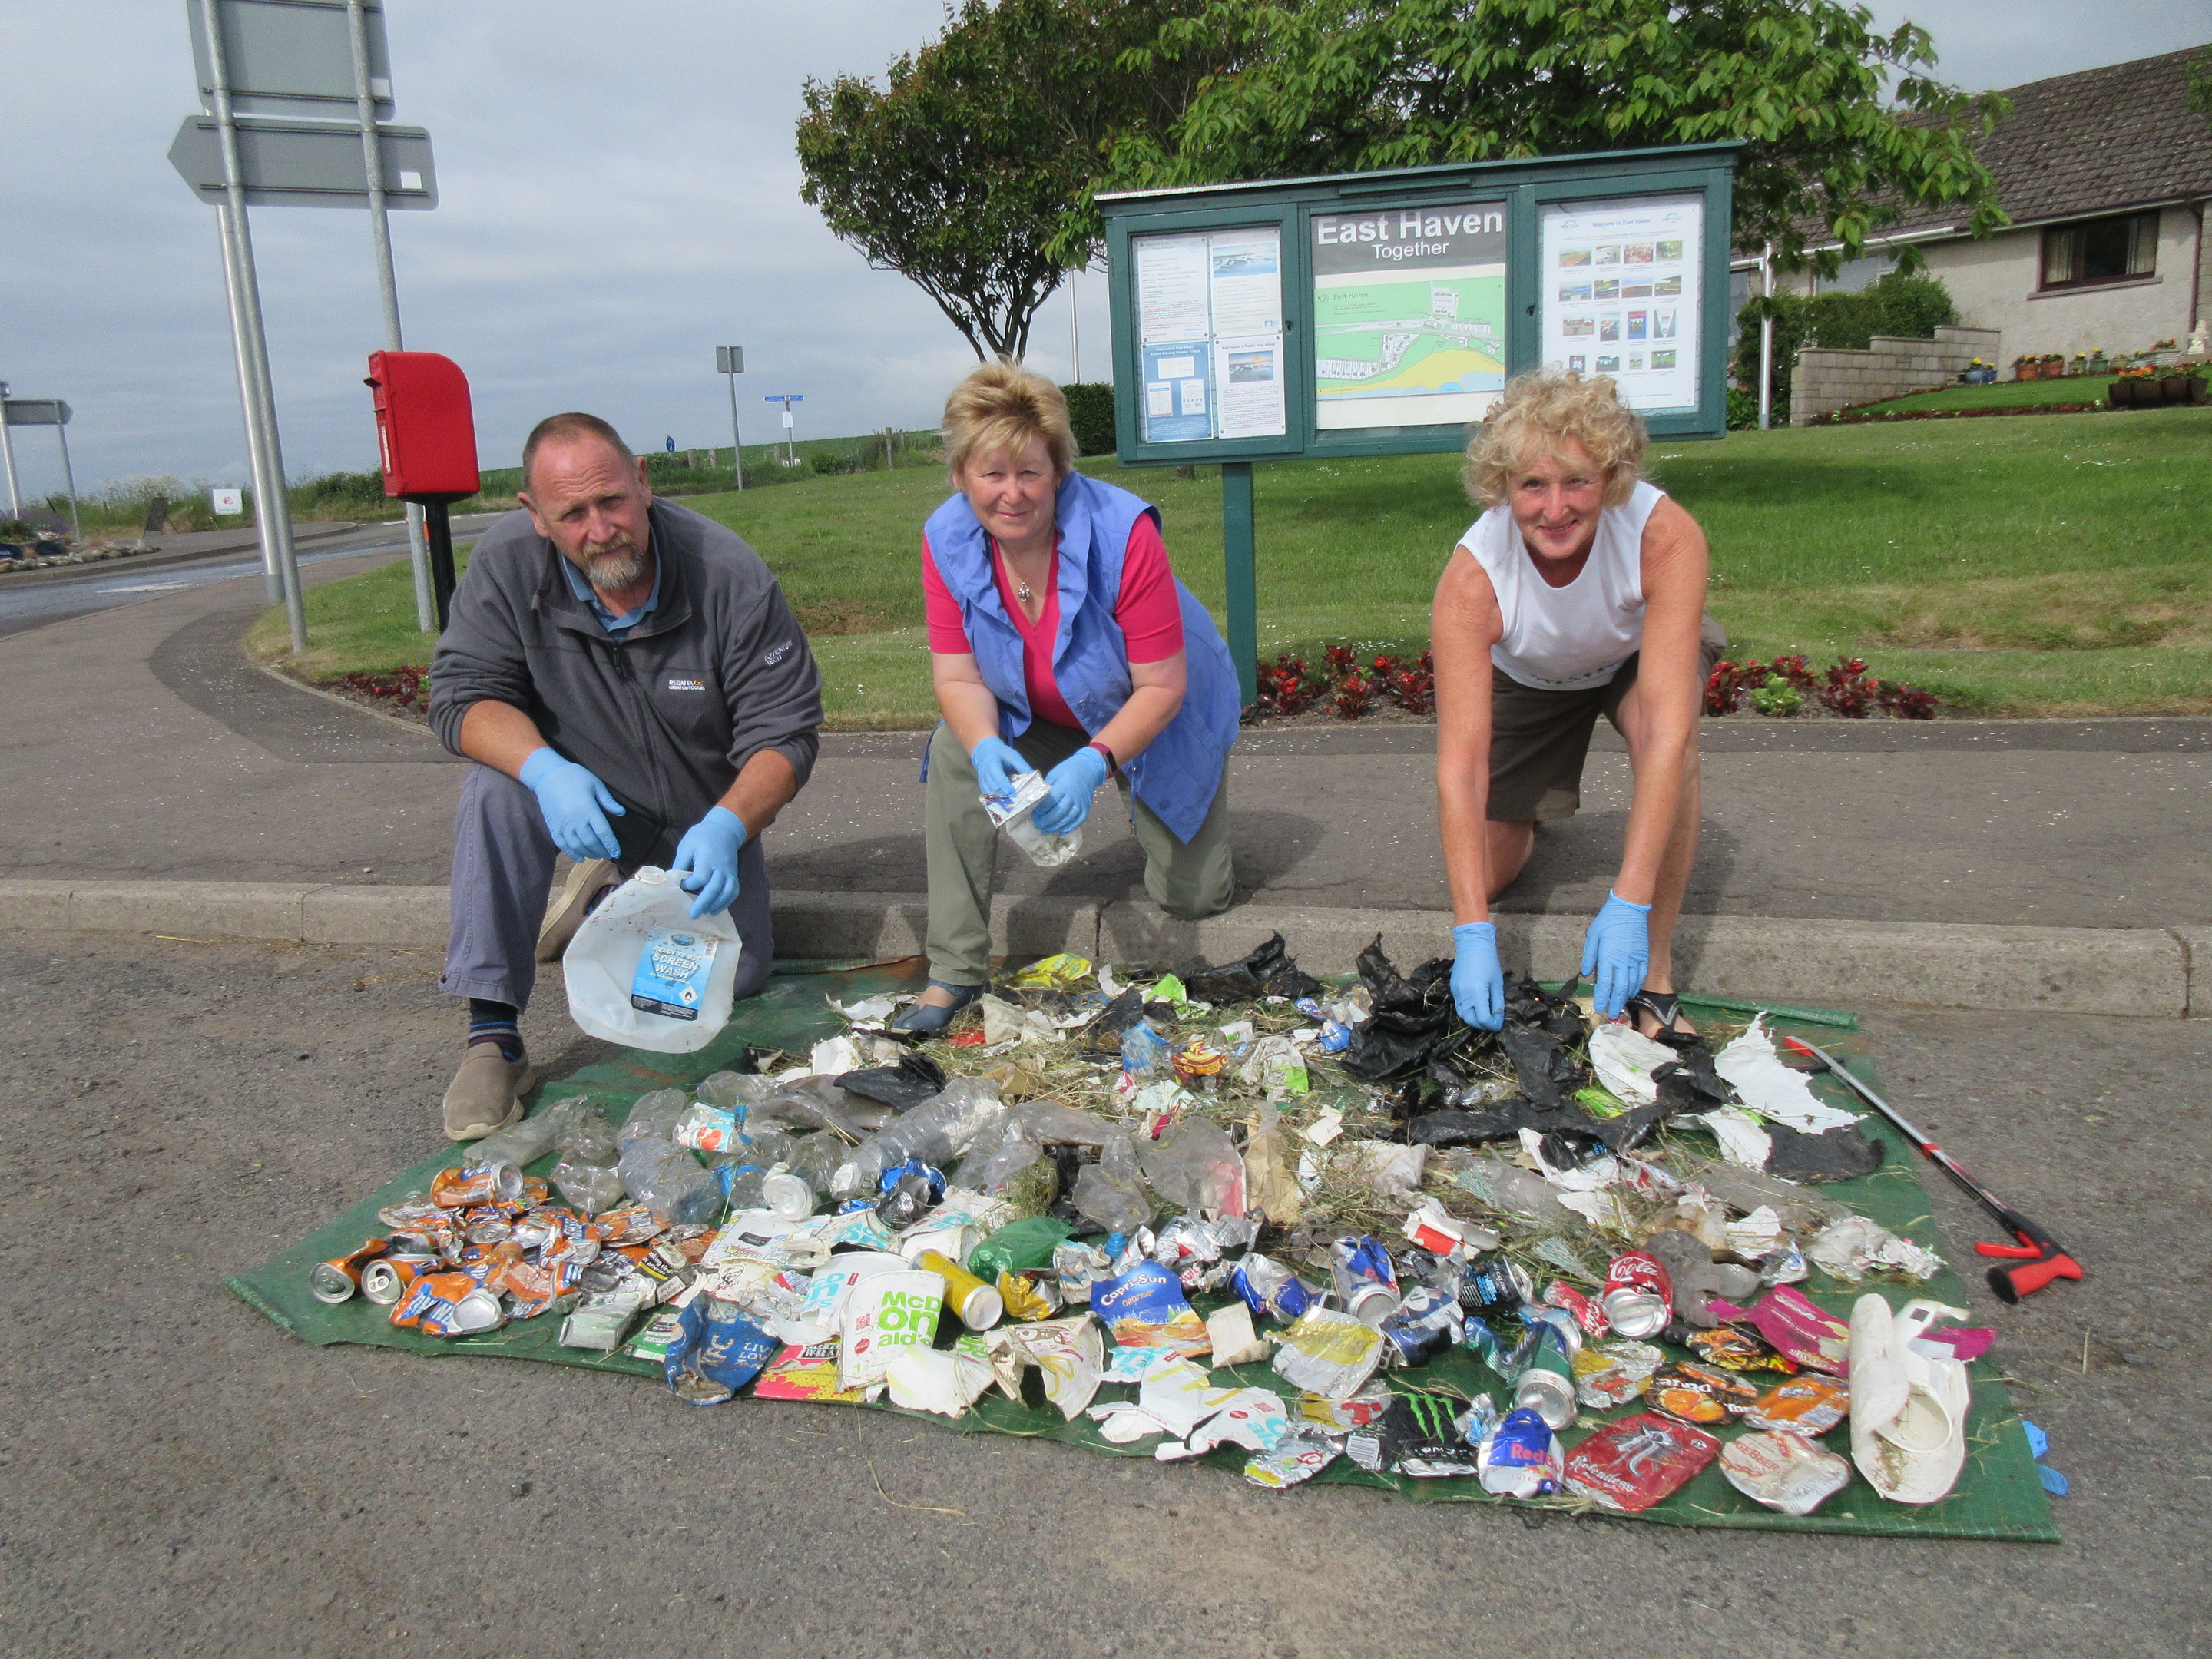 Members of Angus Clean Environments following a recent roadside litter clean-up.